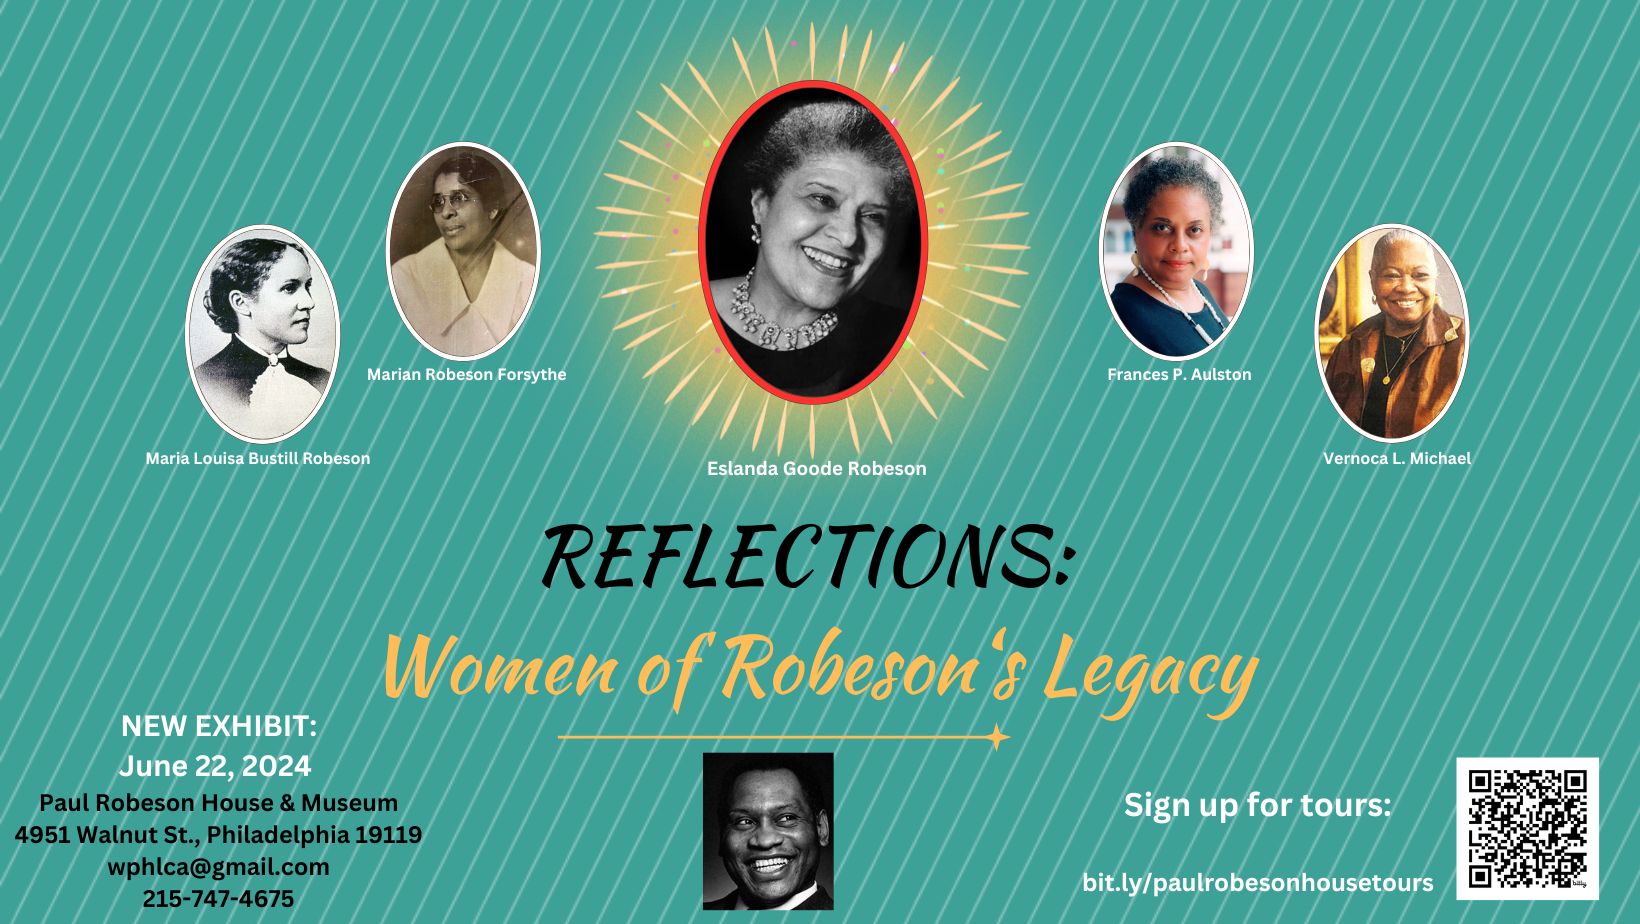 REFLECTIONS: Women of the Robeson Legacy